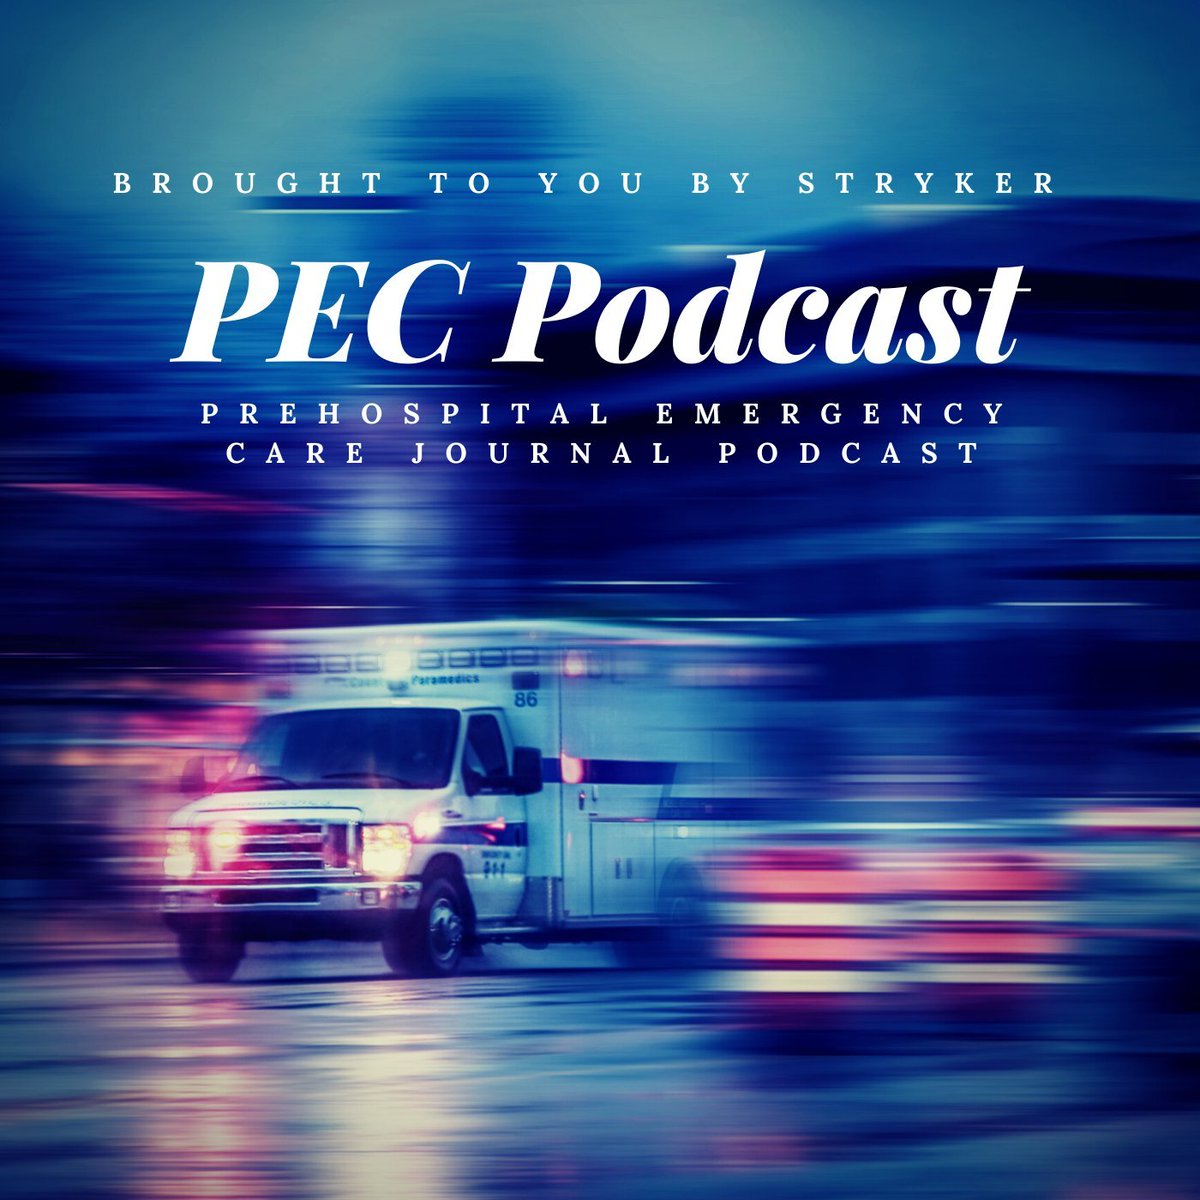 Did you know that you can earn free CE for
@PECpodcast
episodes until the next episode is released through
@ProdigyEMS
?  Check out the latest episode on the prehospital blood transfusion guidelines here: link.prodigyems.com/pec130 #FOAMems